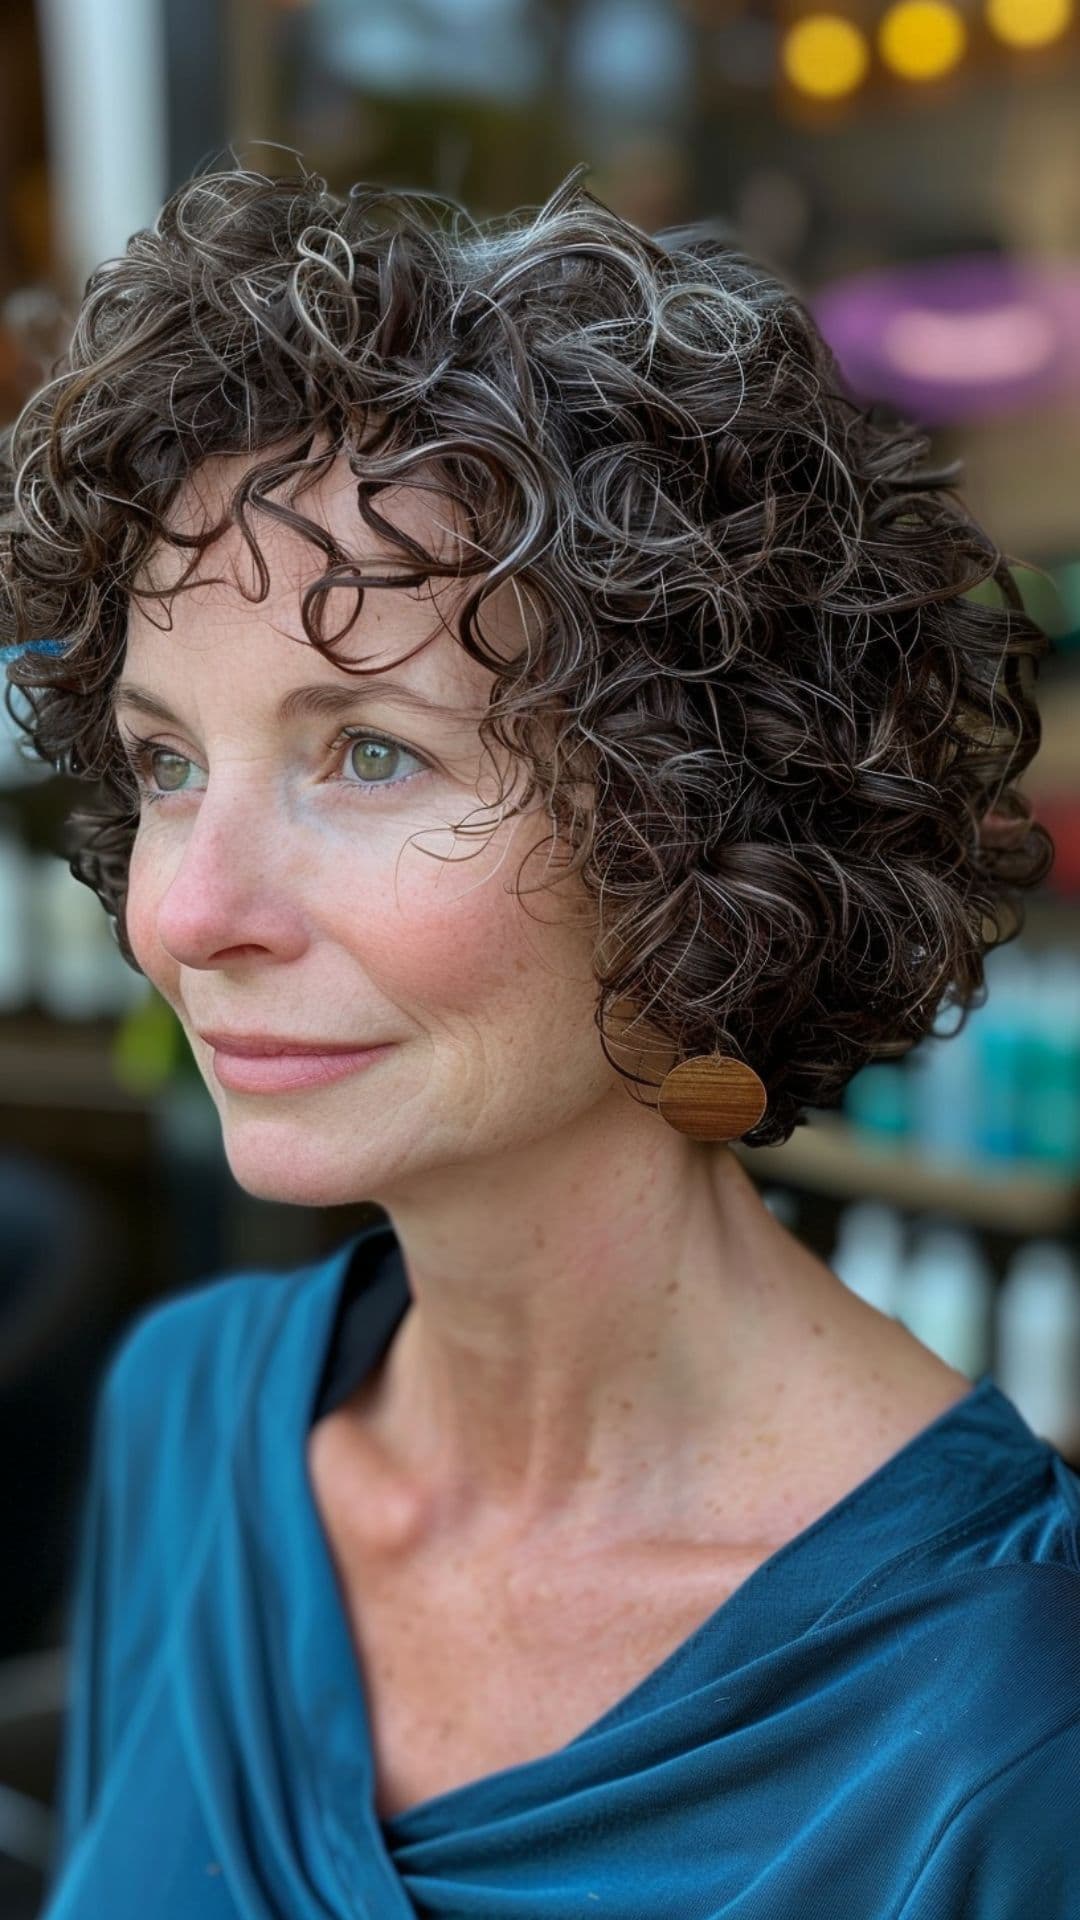 An old woman modelling a curly layered cut.